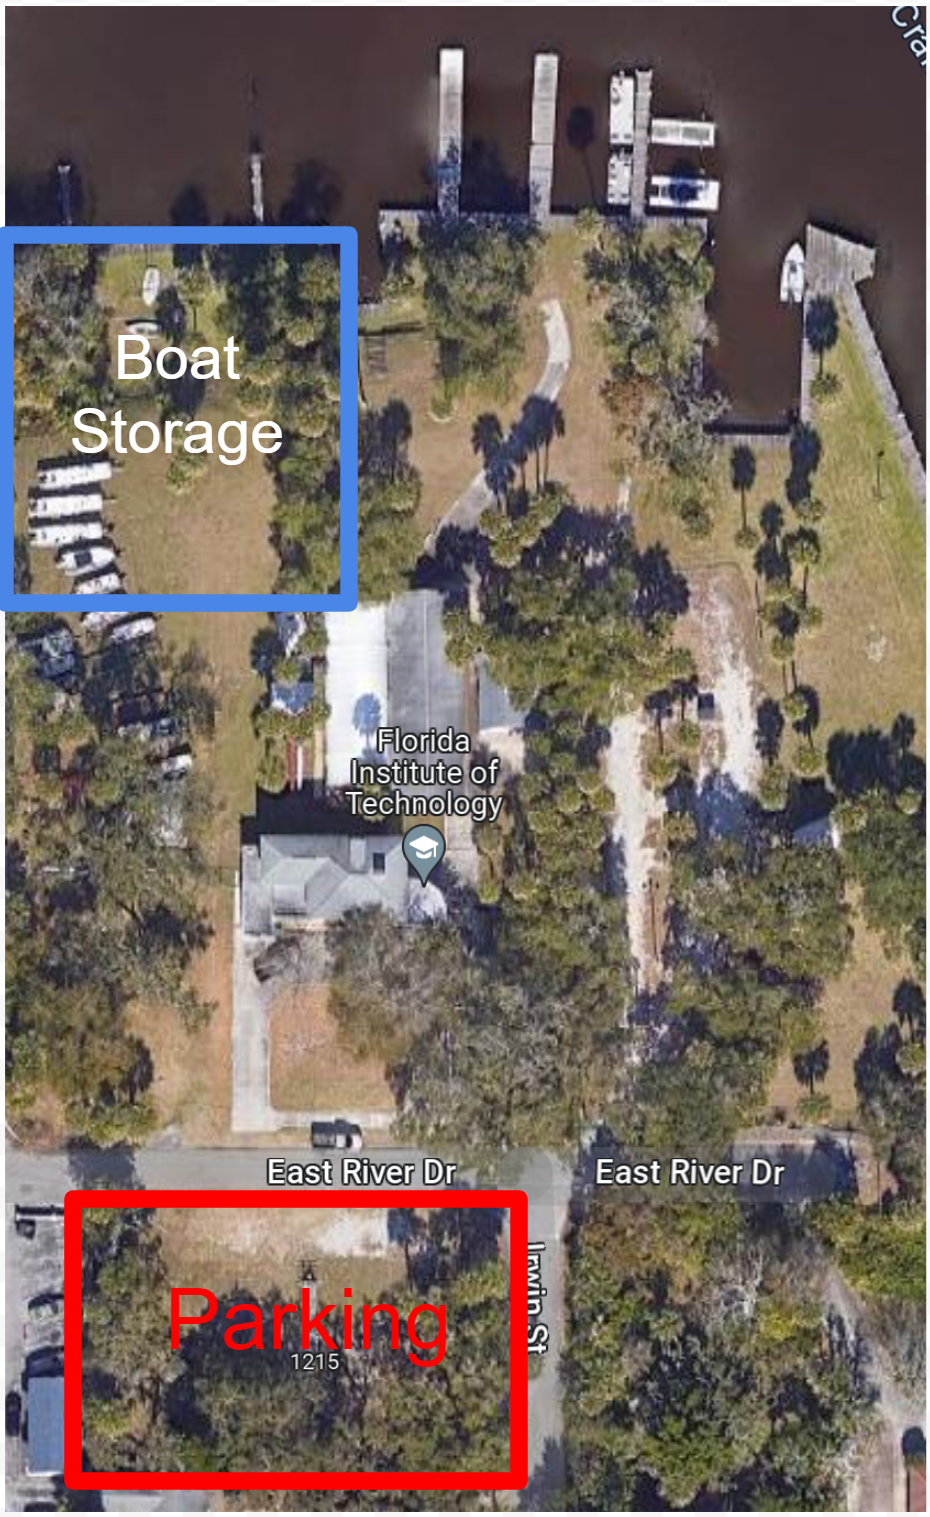 [Preview for Parking/Boat Storage Map]